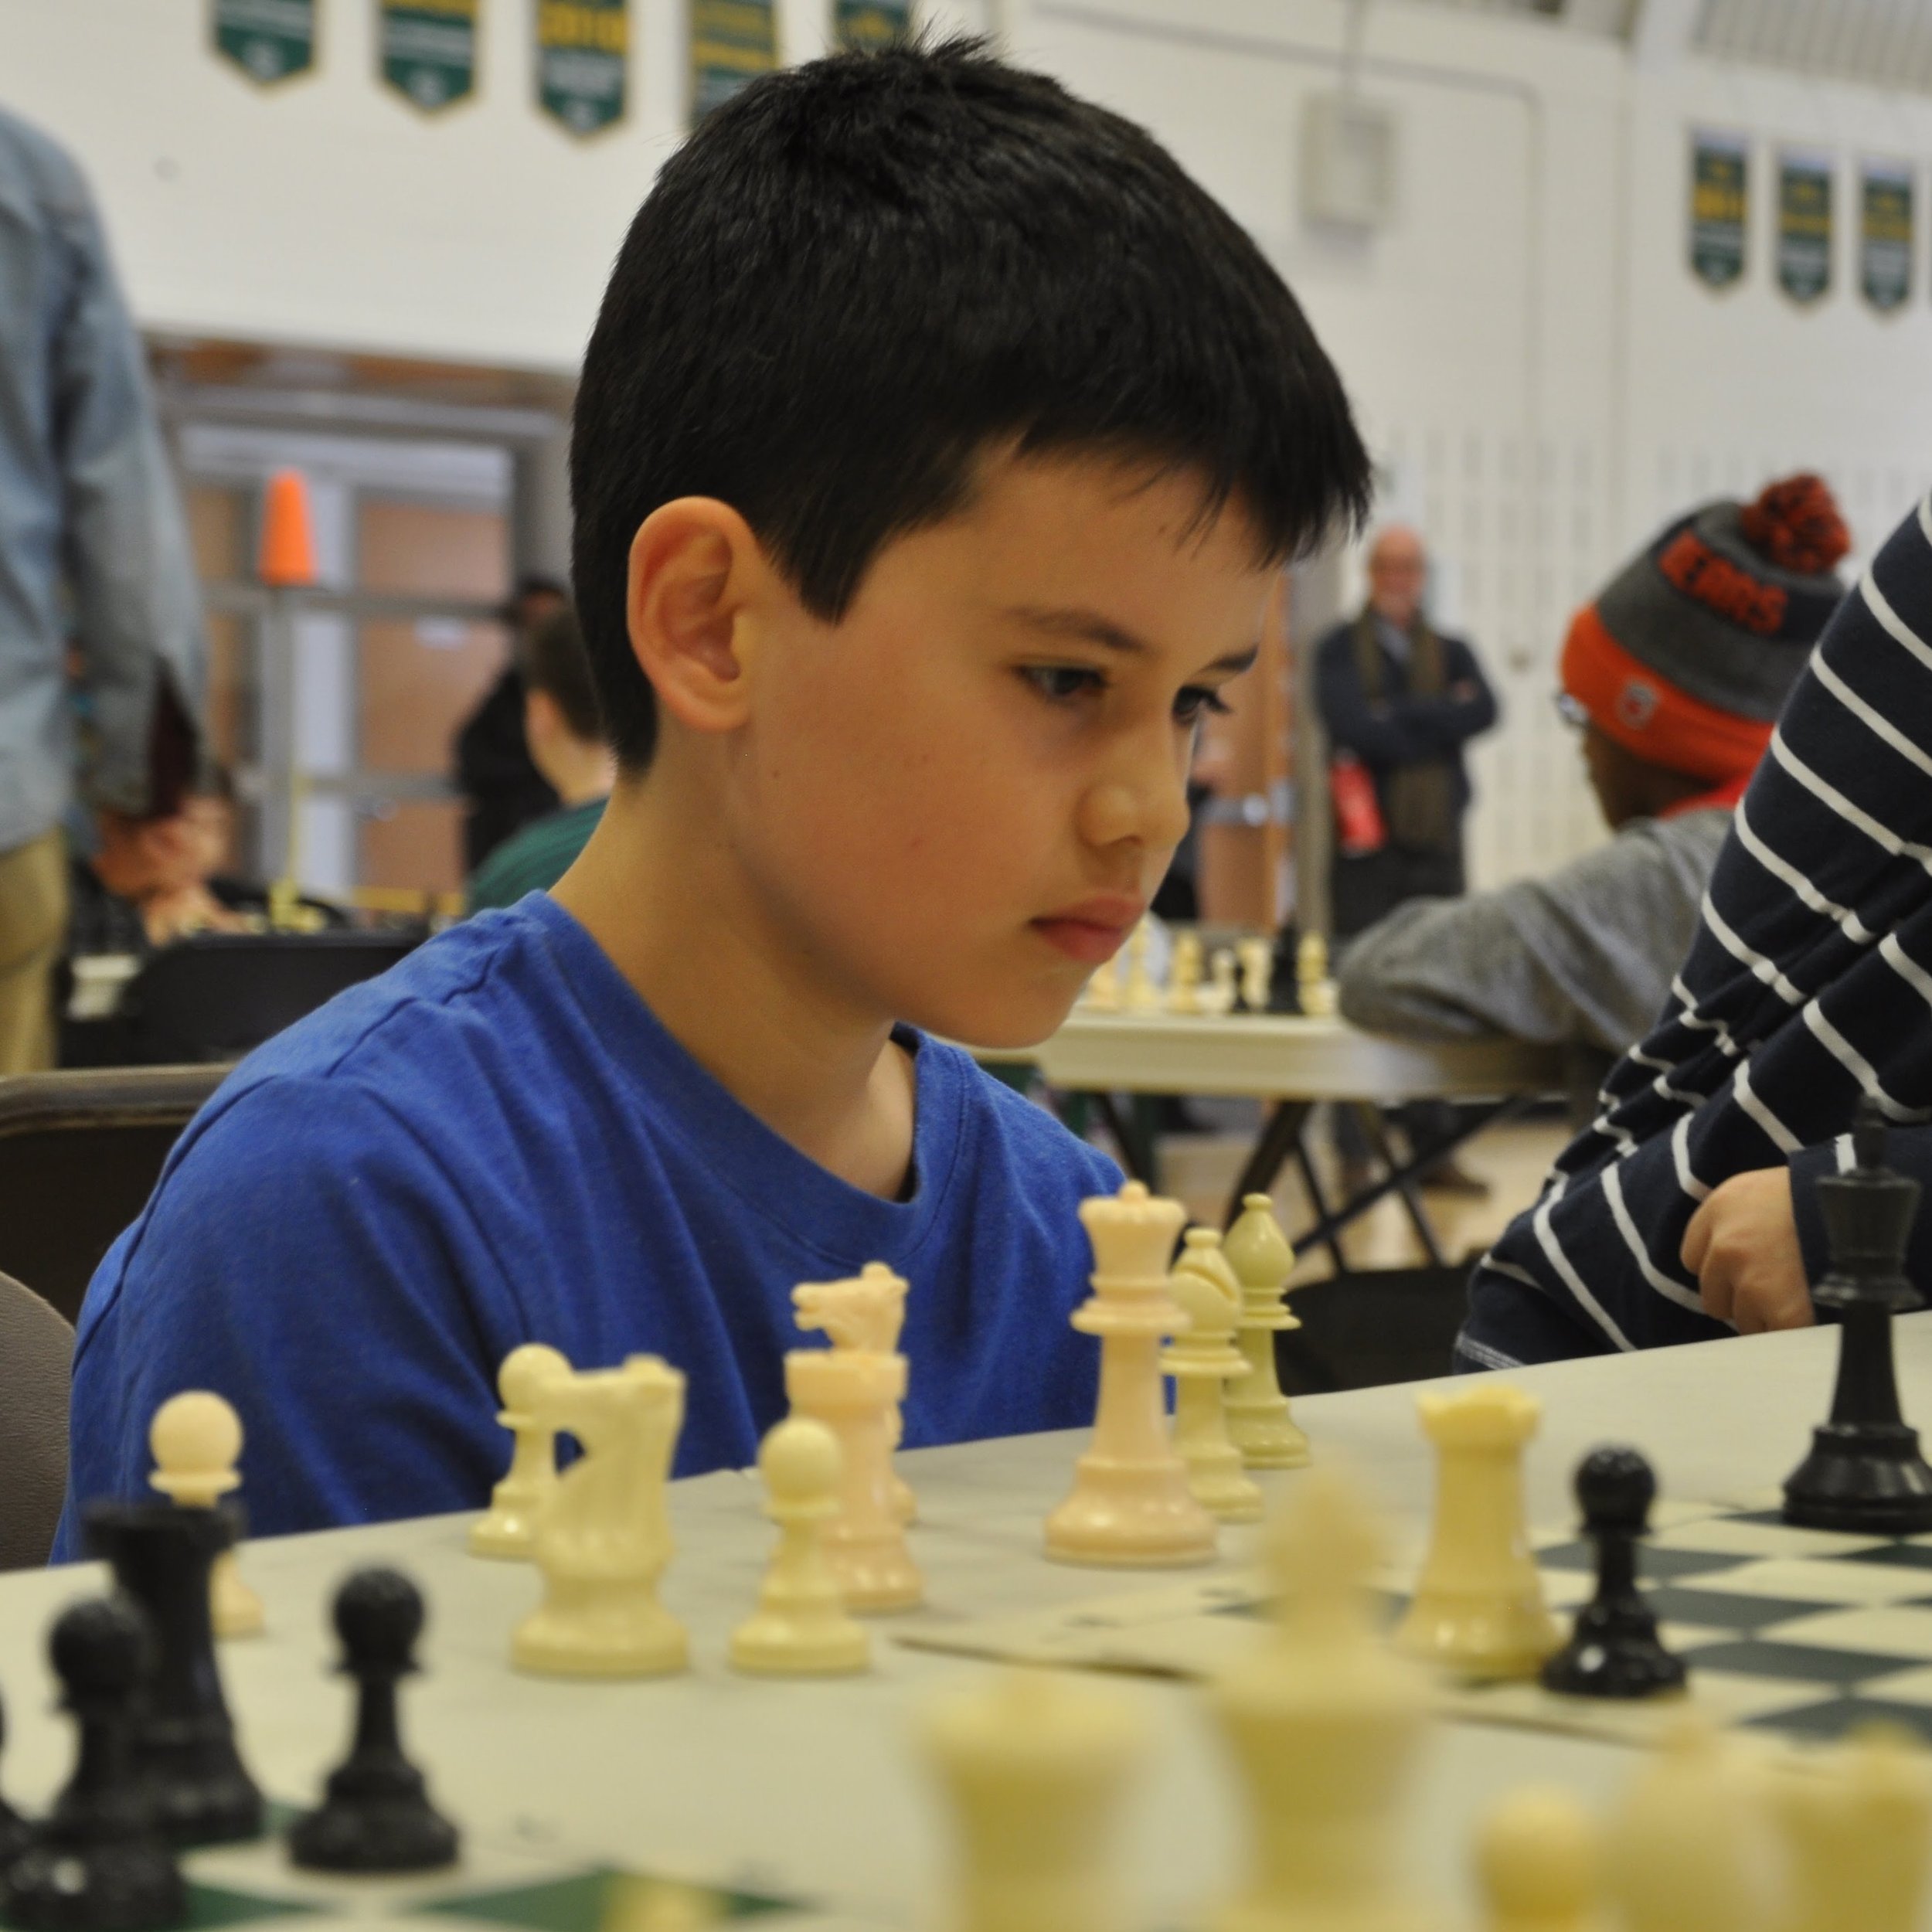 Attention all chess enthusiasts! On Saturday, April 20, The Priory School is proud to be hosting its 26th annual QAIS Chess Tournament, open to Quebec Association of Independent Schools (QAIS) elementary students from Kindergarten to Grade 6. 

Atten